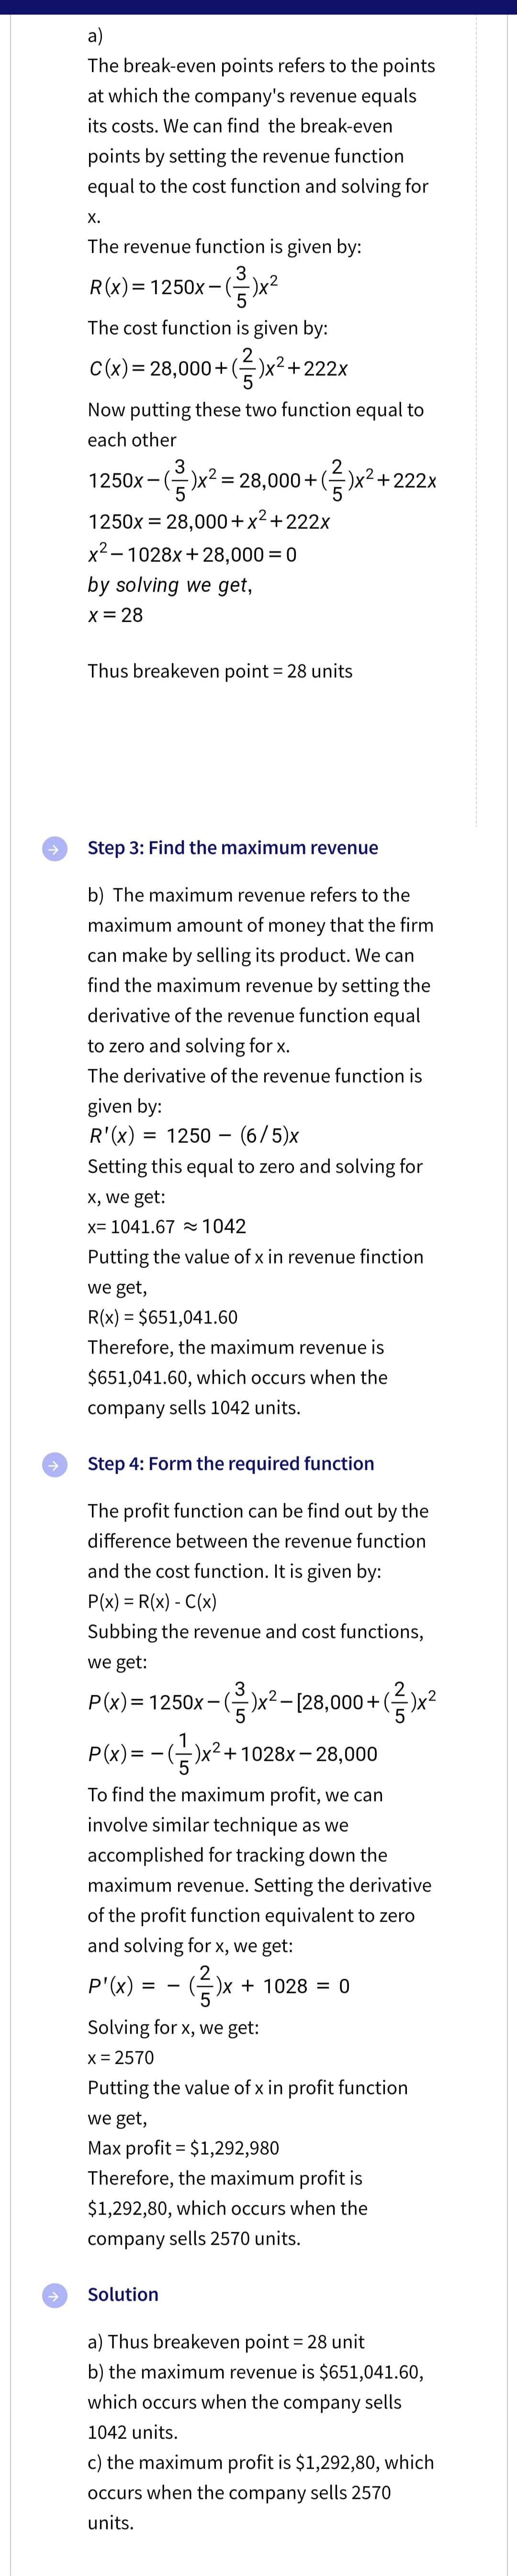 a)
The break-even points refers to the points
at which the company's revenue equals
its costs. We can find the break-even
points by setting the revenue function
equal to the cost function and solving for
X.
The revenue function is given by:
3
R(x)=1250x-(=)x²
5
The cost function is given by:
2
C(x) = 28,000+ (²)x² +222x
Now putting these two function equal to
each other
2
1250x-()x² = 28,000+ (²)x² +222x
1250x = 28,000+x²+222x
x²-1028x+28,000 = 0
by solving we get,
X = 28
Thus breakeven point = 28 units
Step 3: Find the maximum revenue
b) The maximum revenue refers to the
maximum amount of money that the firm
can make by selling its product. We can
find the maximum revenue by setting the
derivative of the revenue function equal
to zero and solving for x.
The derivative of the revenue function is
given by:
R'(x) = 1250 (6/5)x
Setting this equal to zero and solving for
x, we get:
x= 1041.67 ≈ 1042
Putting the value of x in revenue finction
we get,
R(x) = $651,041.60
Therefore, the maximum revenue is
$651,041.60, which occurs when the
company sells 1042 units.
Step 4: Form the required function
The profit function can be find out by the
difference between the revenue function
and the cost function. It is given by:
P(x) = R(x) - C(x)
Subbing the revenue and cost functions,
we get:
3
2
P(x)= 1250x – (²)x² – [28,000 + (²)x²
-)x² +1028x-28,000
P(x)=
To find the maximum profit, we can
involve similar technique as we
accomplished for tracking down the
maximum revenue. Setting the derivative
of the profit function equivalent to zero
and solving for x, we get:
2
(²)x + 1028 = 0
P'(x):
= -
Solving for x, we get:
x = 2570
Putting the value of x in profit function
we get,
Max profit = $1,292,980
Therefore, the maximum profit is
$1,292,80, which occurs when the
company sells 2570 units.
Solution
a) Thus breakeven point = 28 unit
b) the maximum revenue is $651,041.60,
which occurs when the company sells
1042 units.
c) the maximum profit is $1,292,80, which
occurs when the company sells 2570
units.